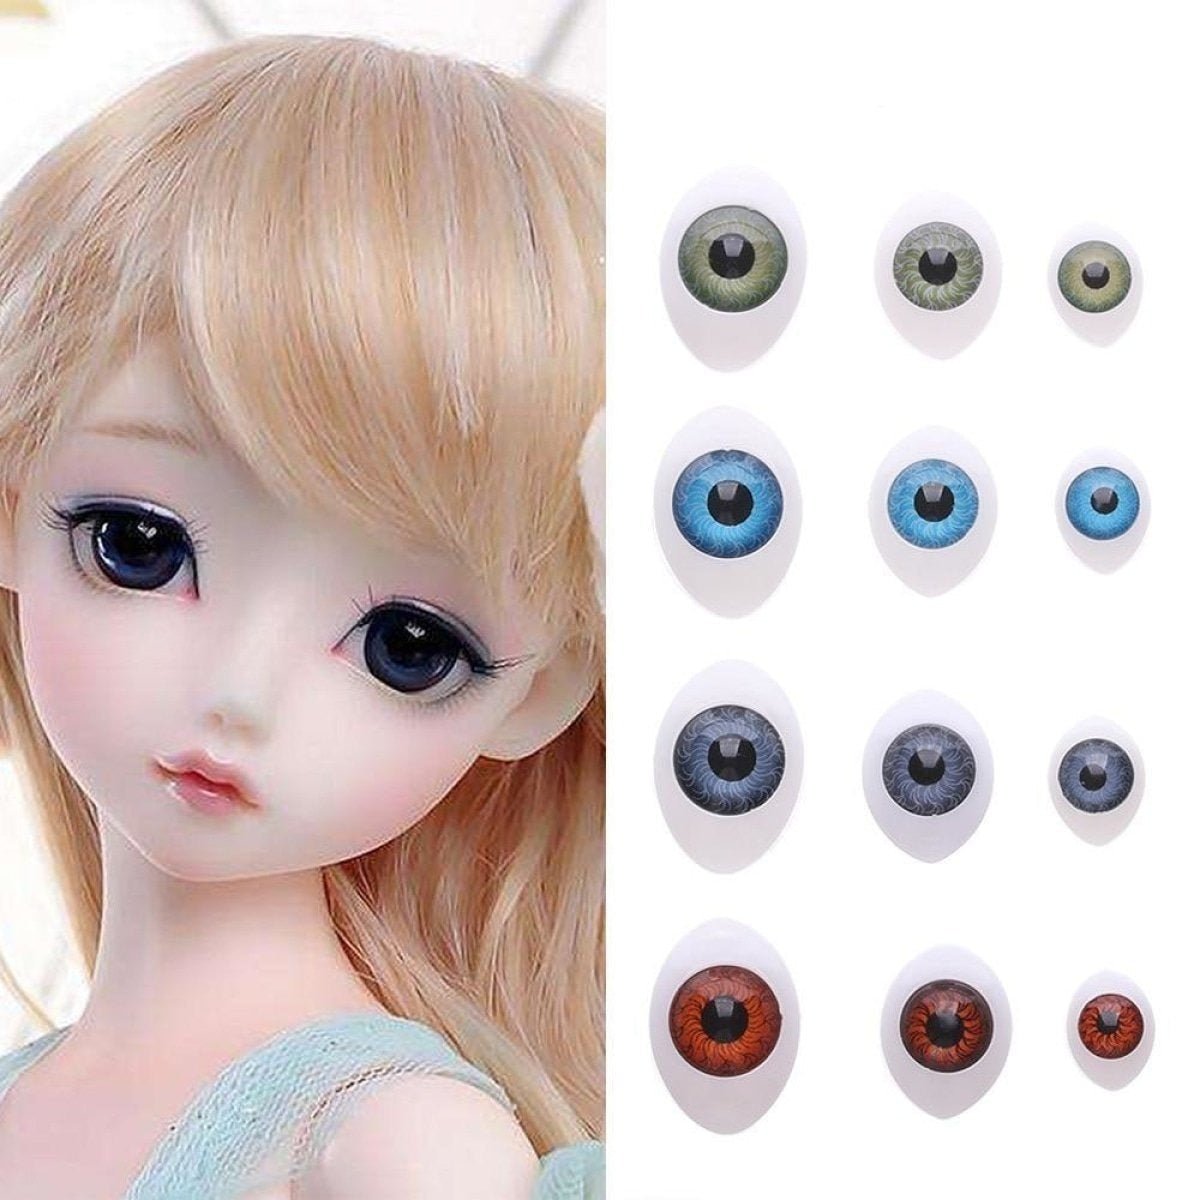 32/40pcs Oval Shaped Doll Eyes Plastic for DIY Toy Doll Animal Puppet Dinosaur Half Round - Green - 10x13mm - Asia Sell